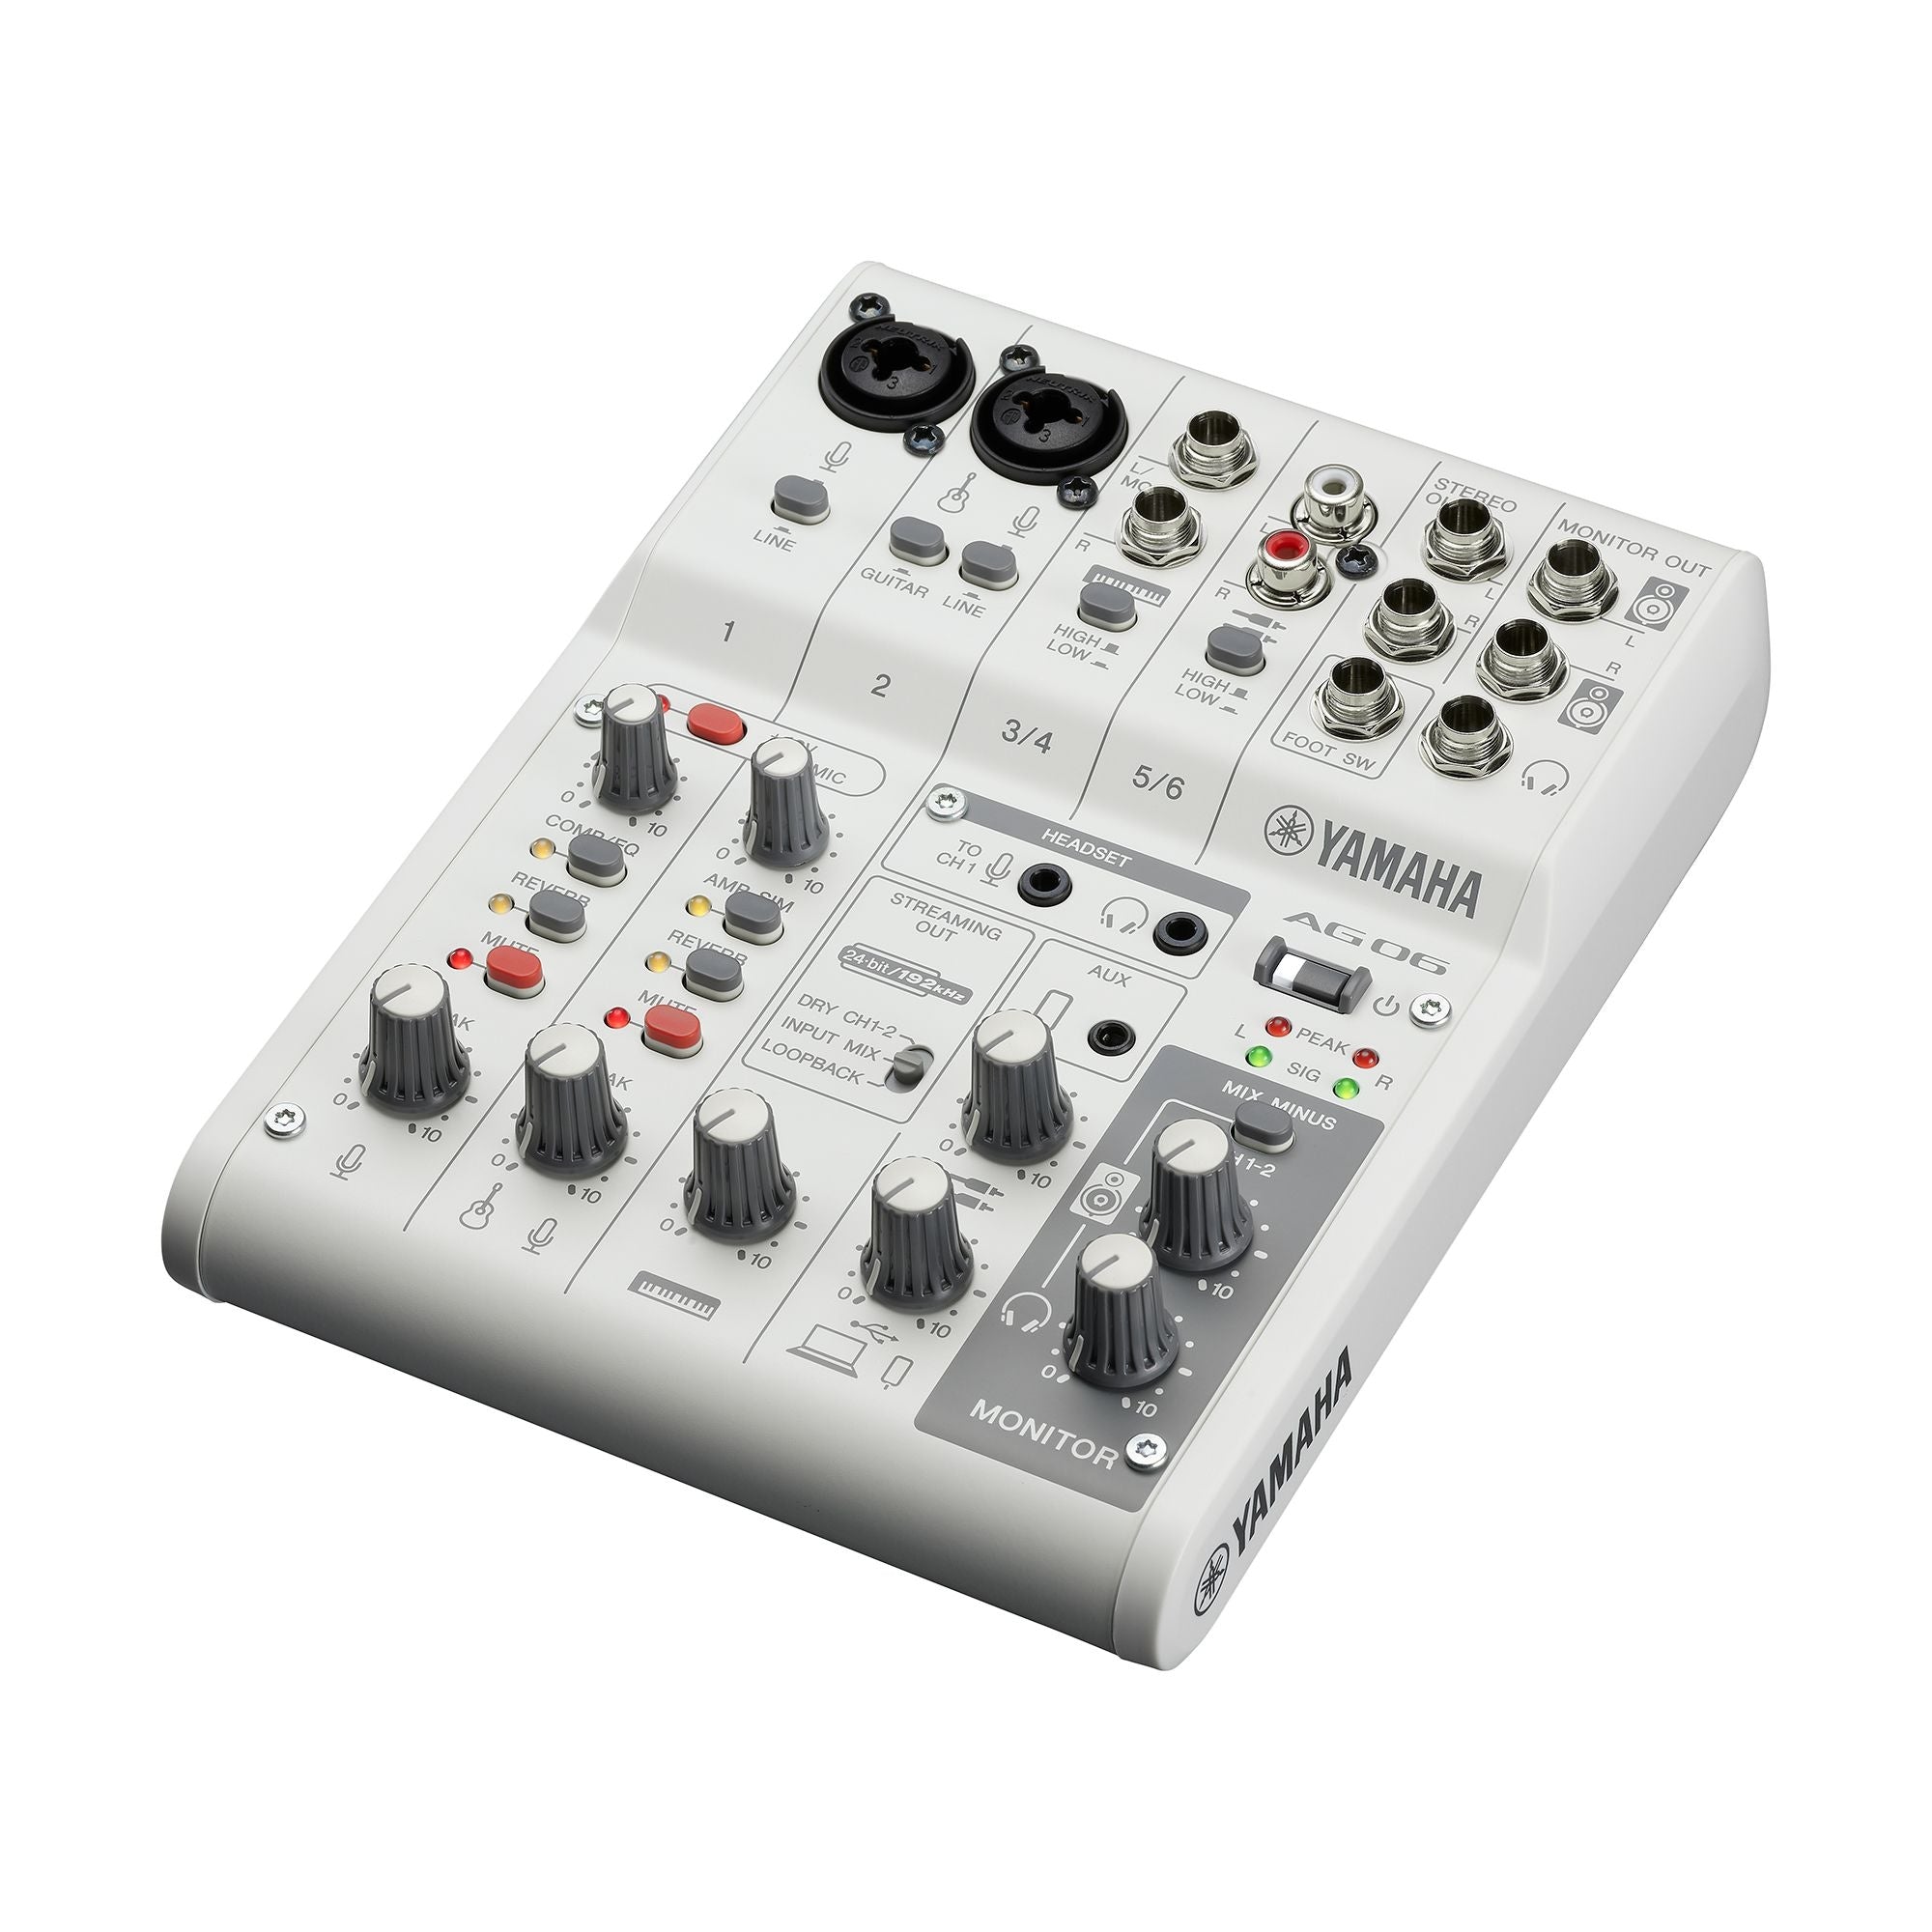 Yamaha Ag06 Mk2 6-Channel Mixer And Usb Audio Interface - White